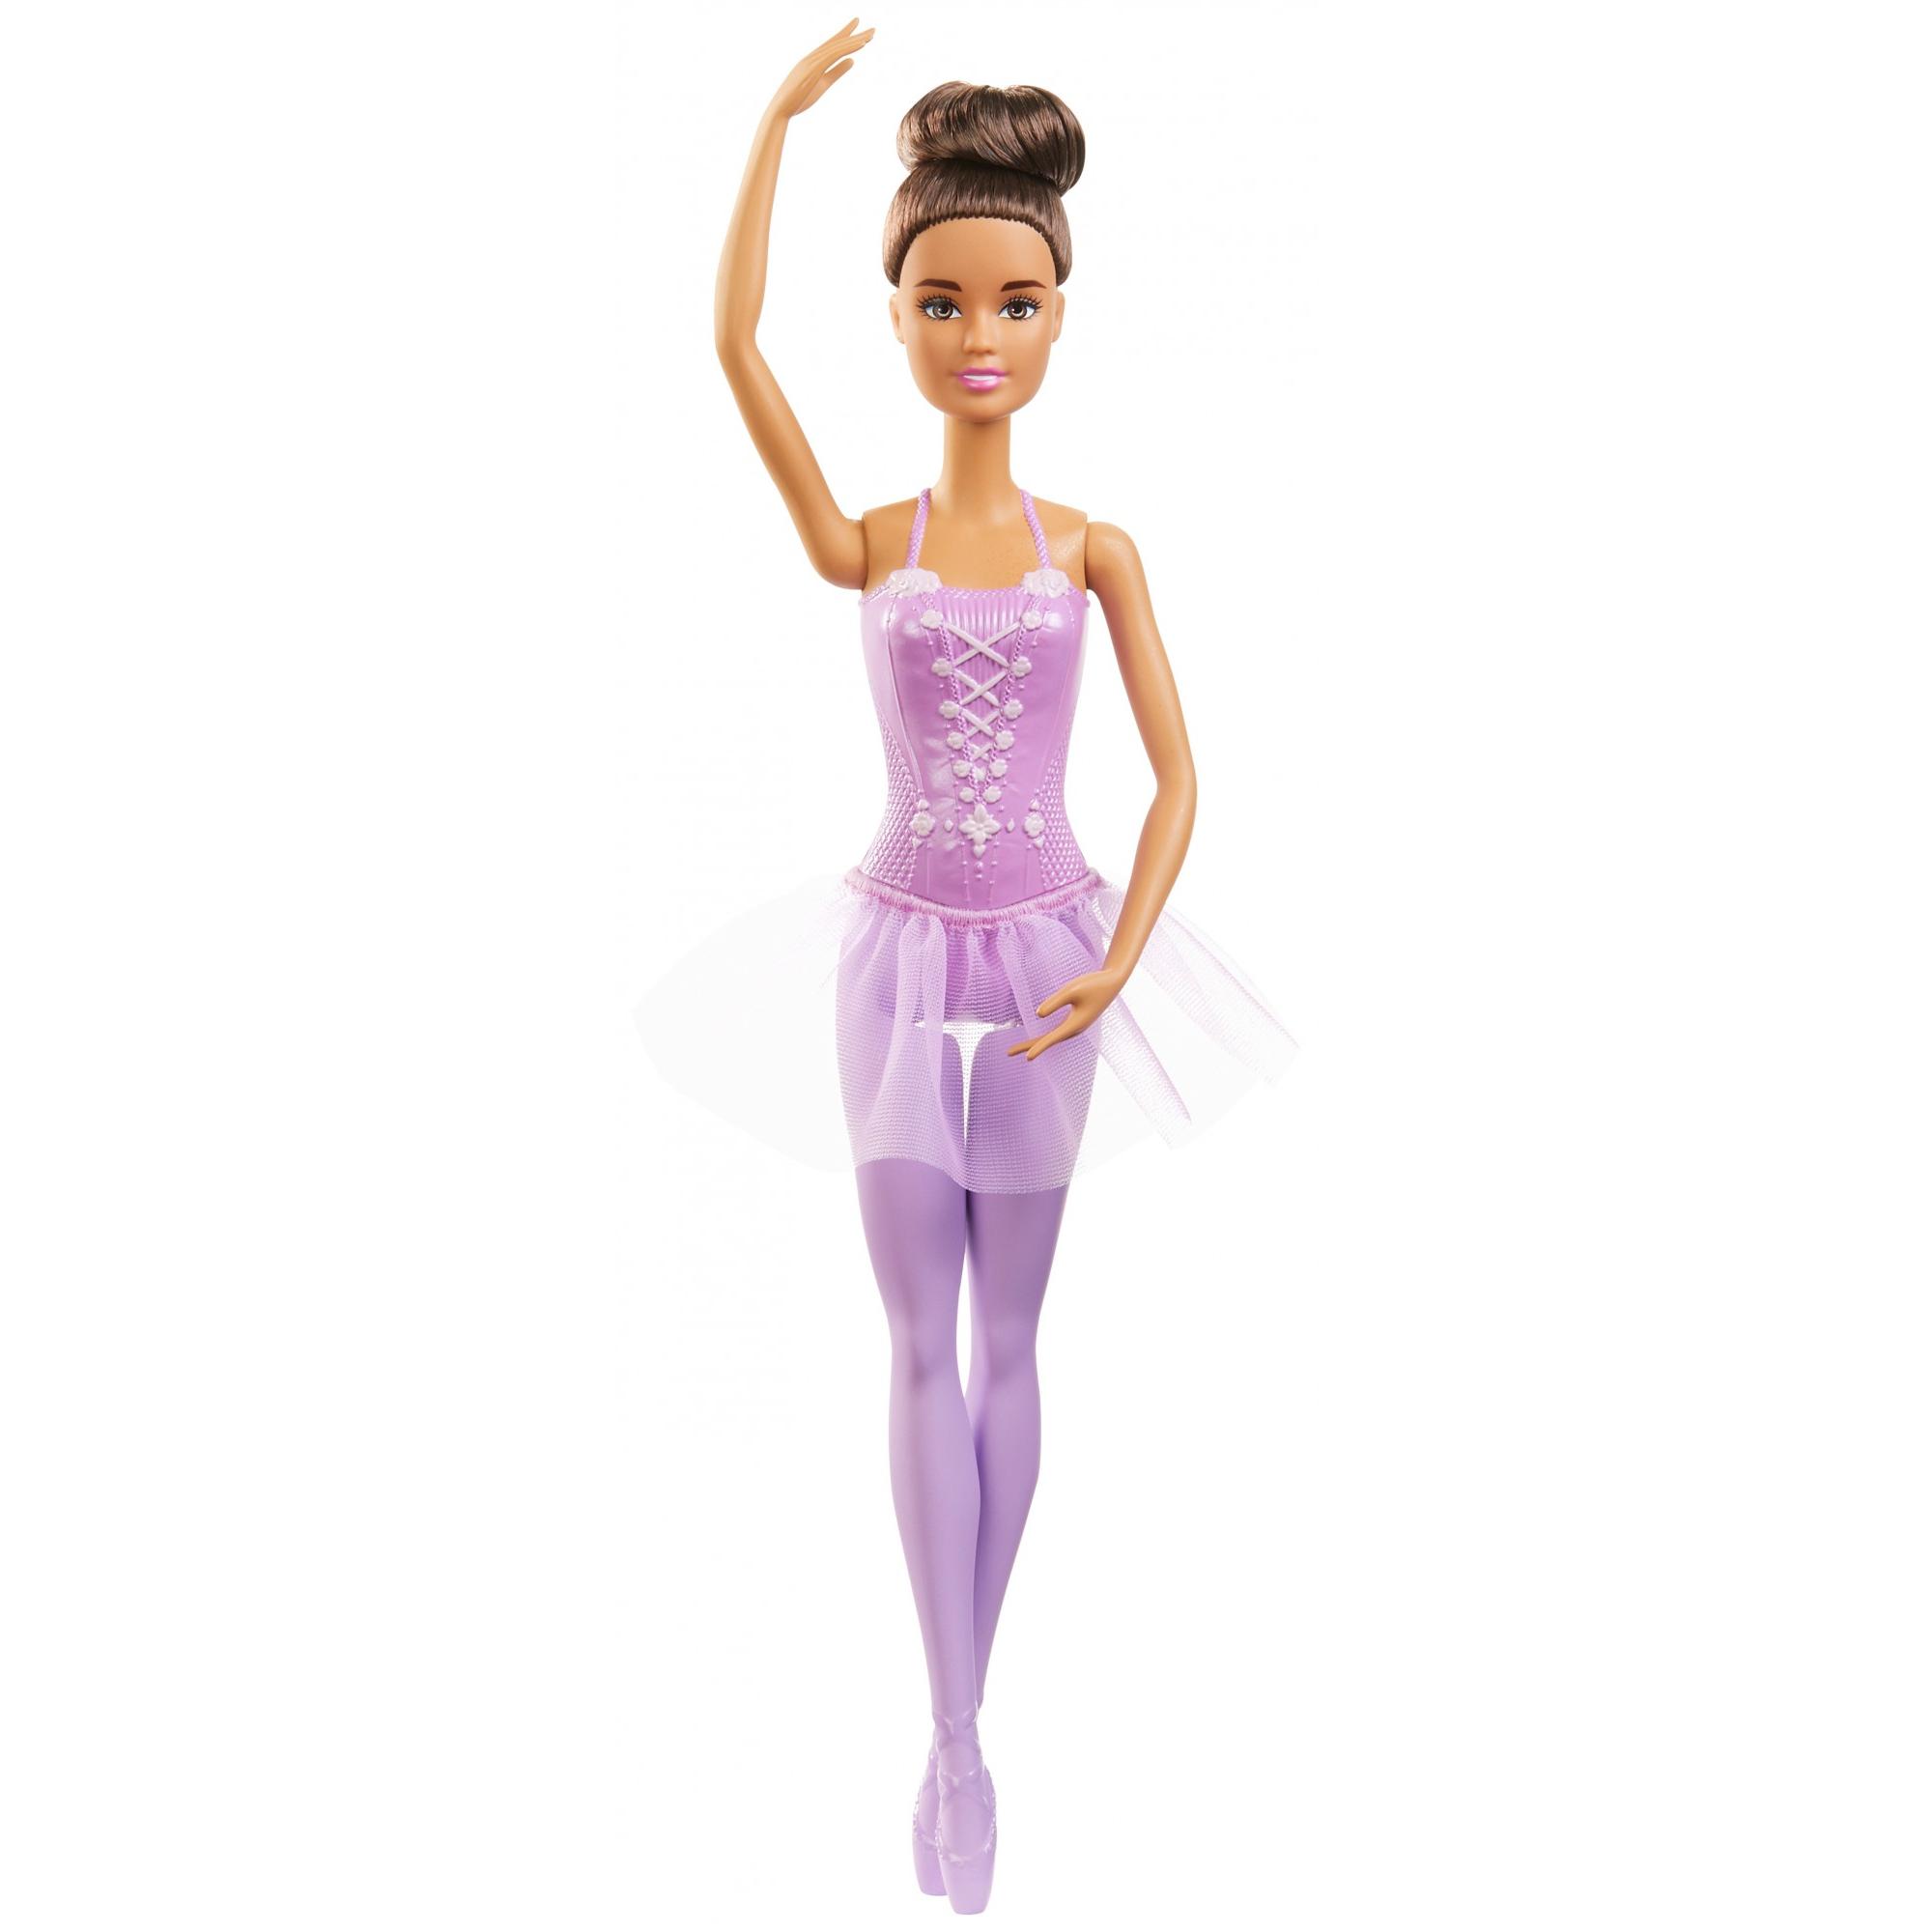 Barbie Ballerina Doll with Tutu, Ballet Arms & Sculpted Toe Shoes (Styles May Vary) - image 3 of 4